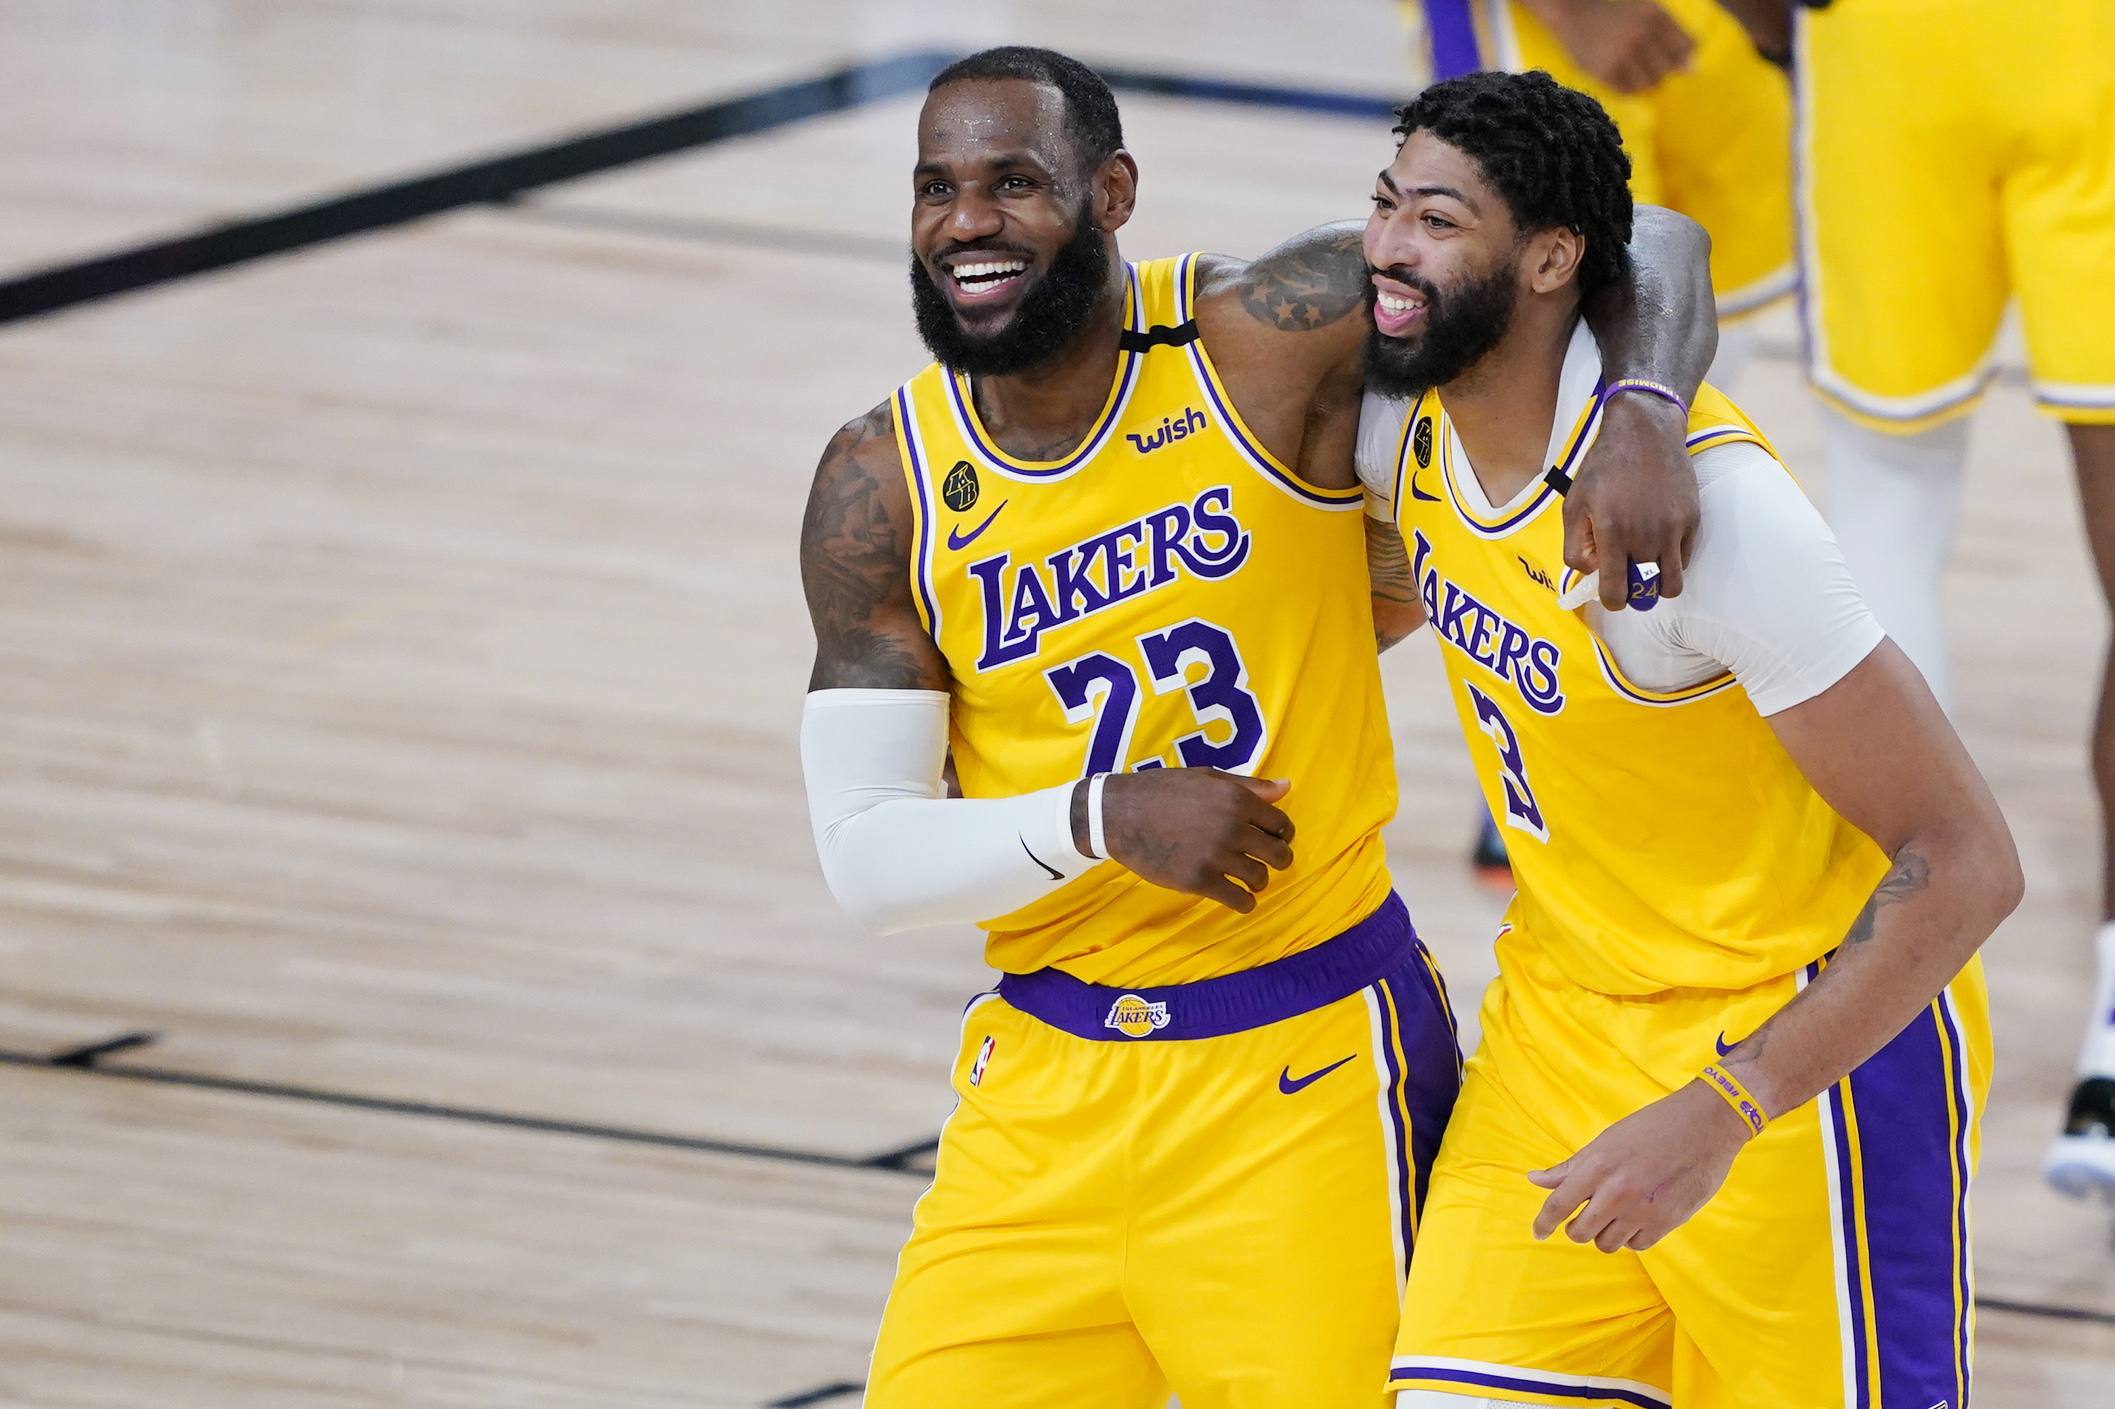 LeBron James and Anthony Davis celebrate after winning a game